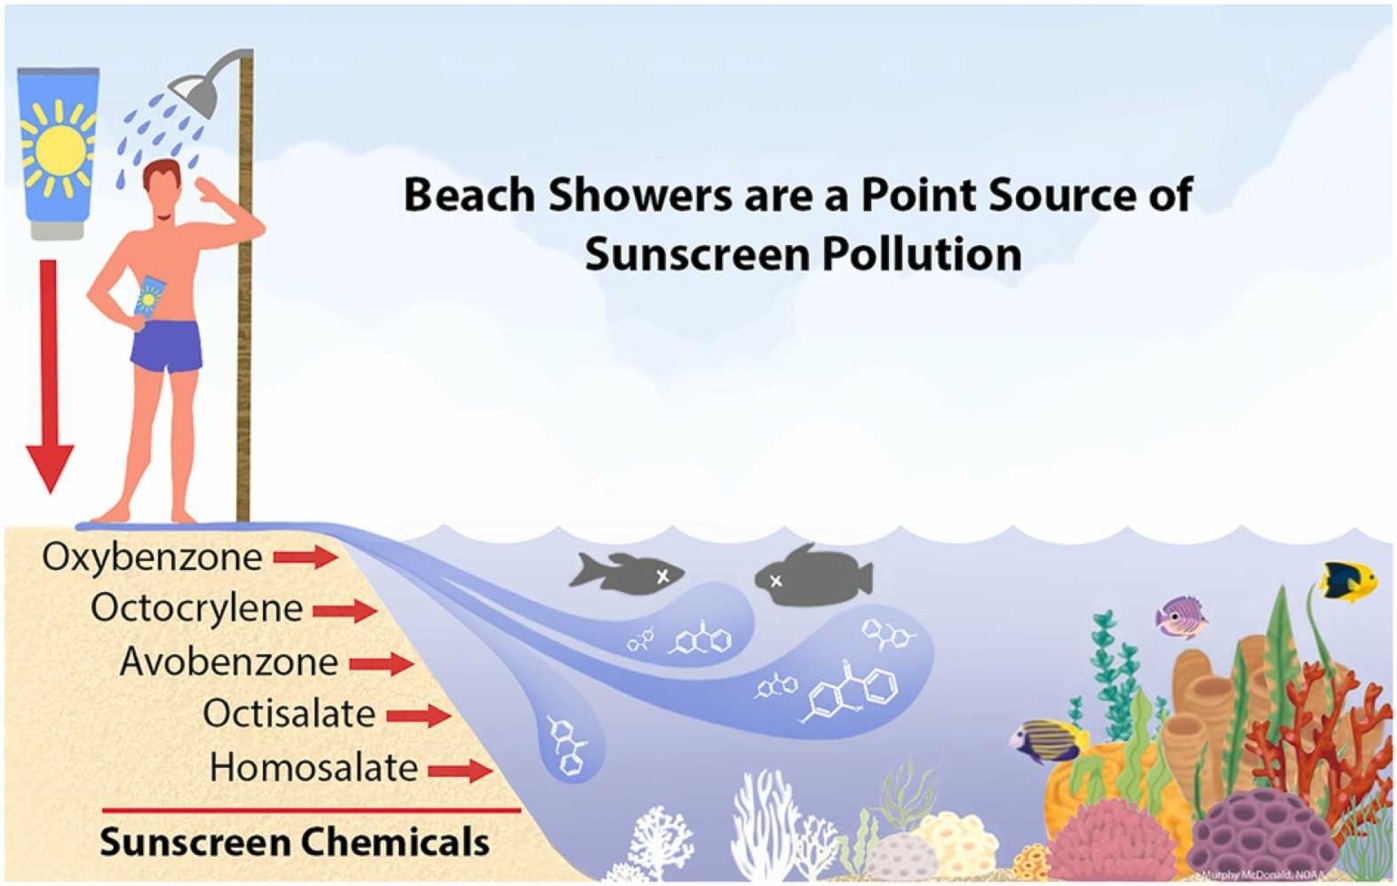 Research Determines Beach Showers are a Source of Sunscreen Pollution to Hawaii Coral Reefs